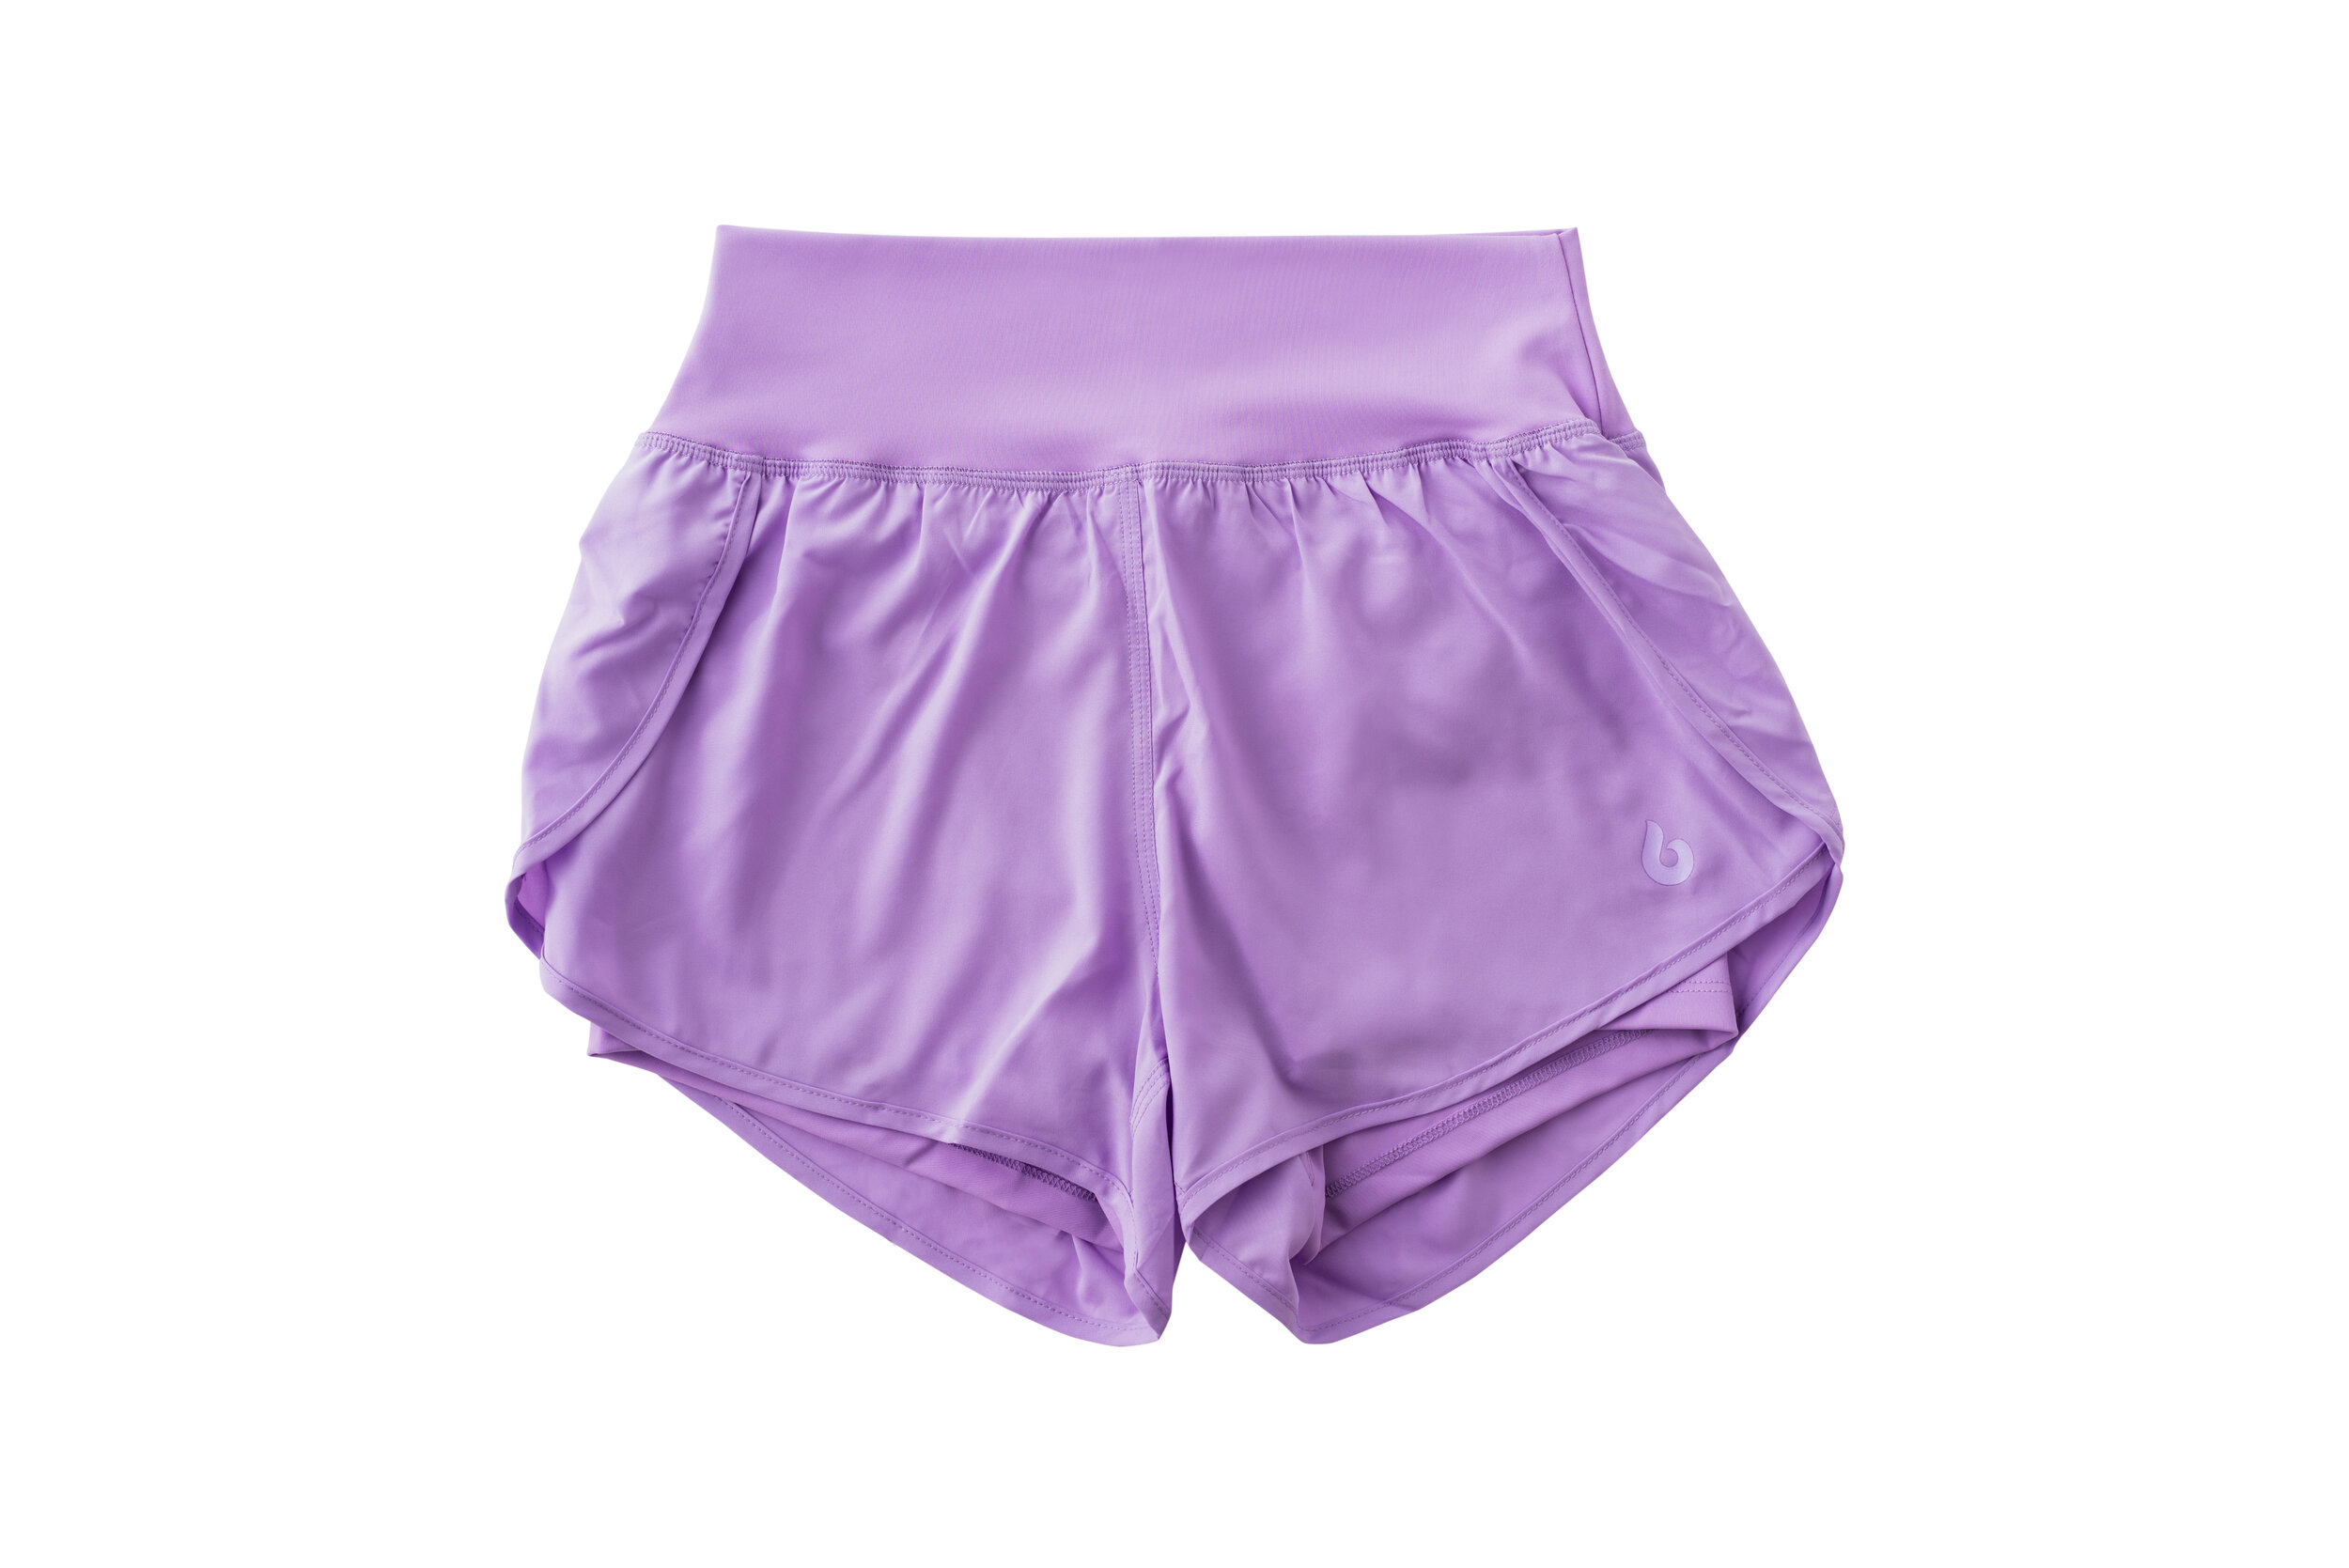 PHNX Serena Shorts Women's Two in One Shorts — PHNX